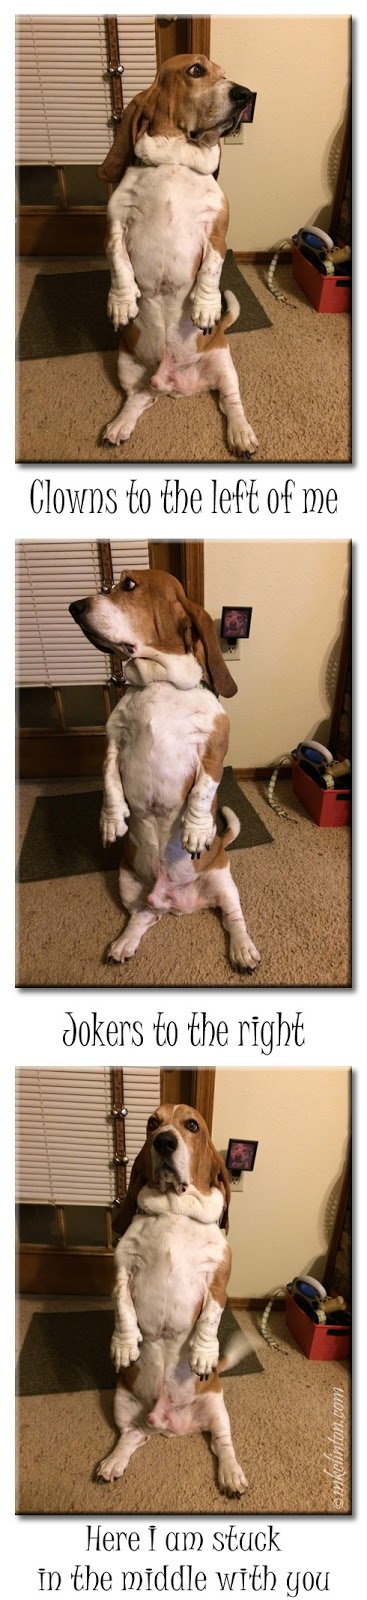 Bentley Basset Hound in a trio of photos. He is sitting up looking left, right and forward